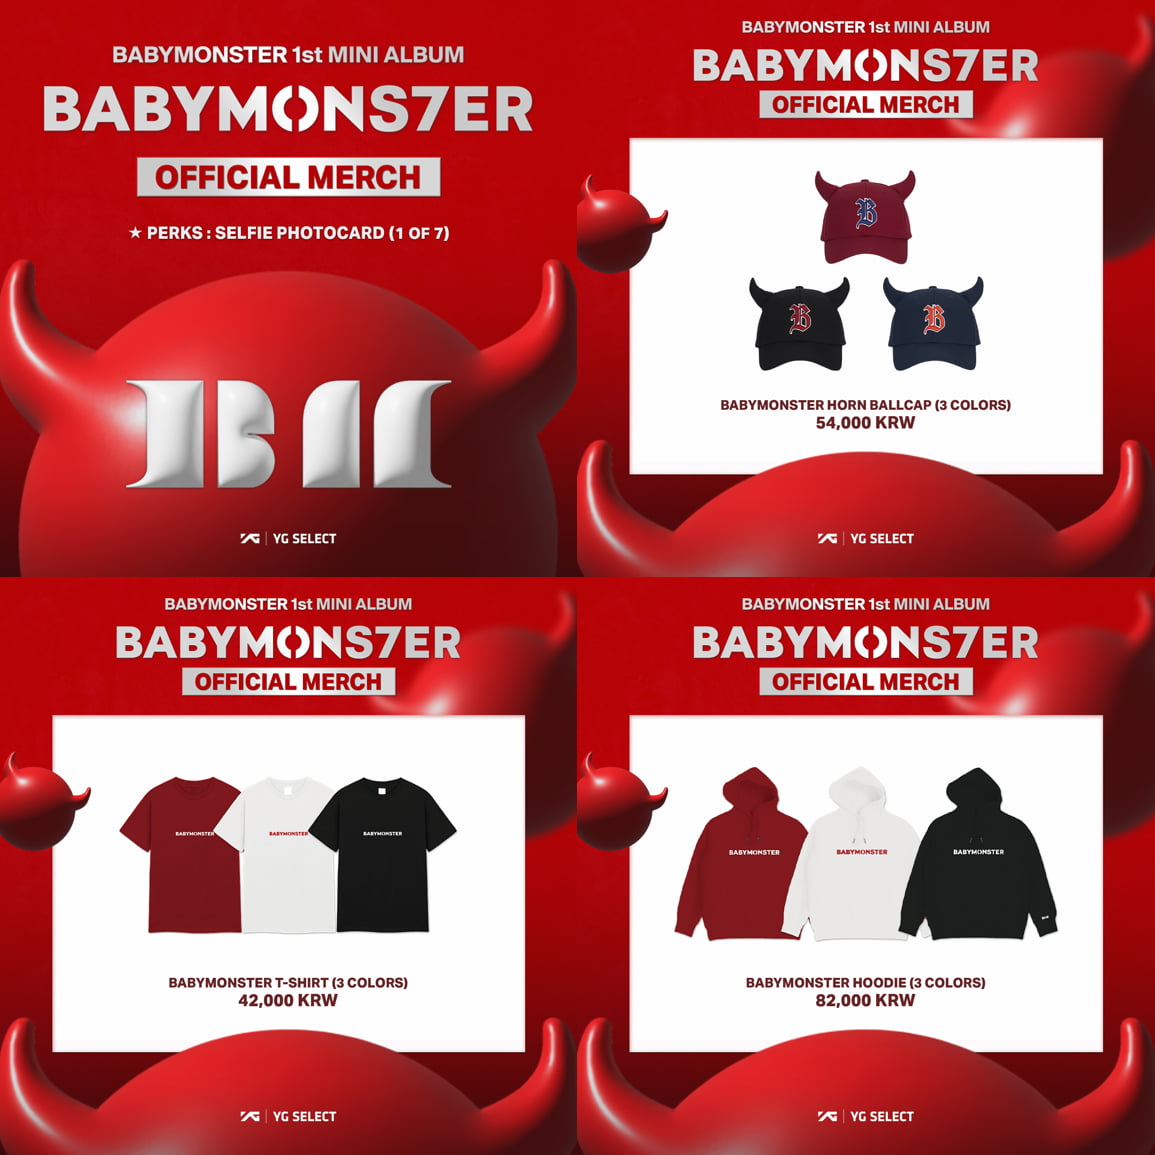 YG PLUS releases Baby Monster official MD